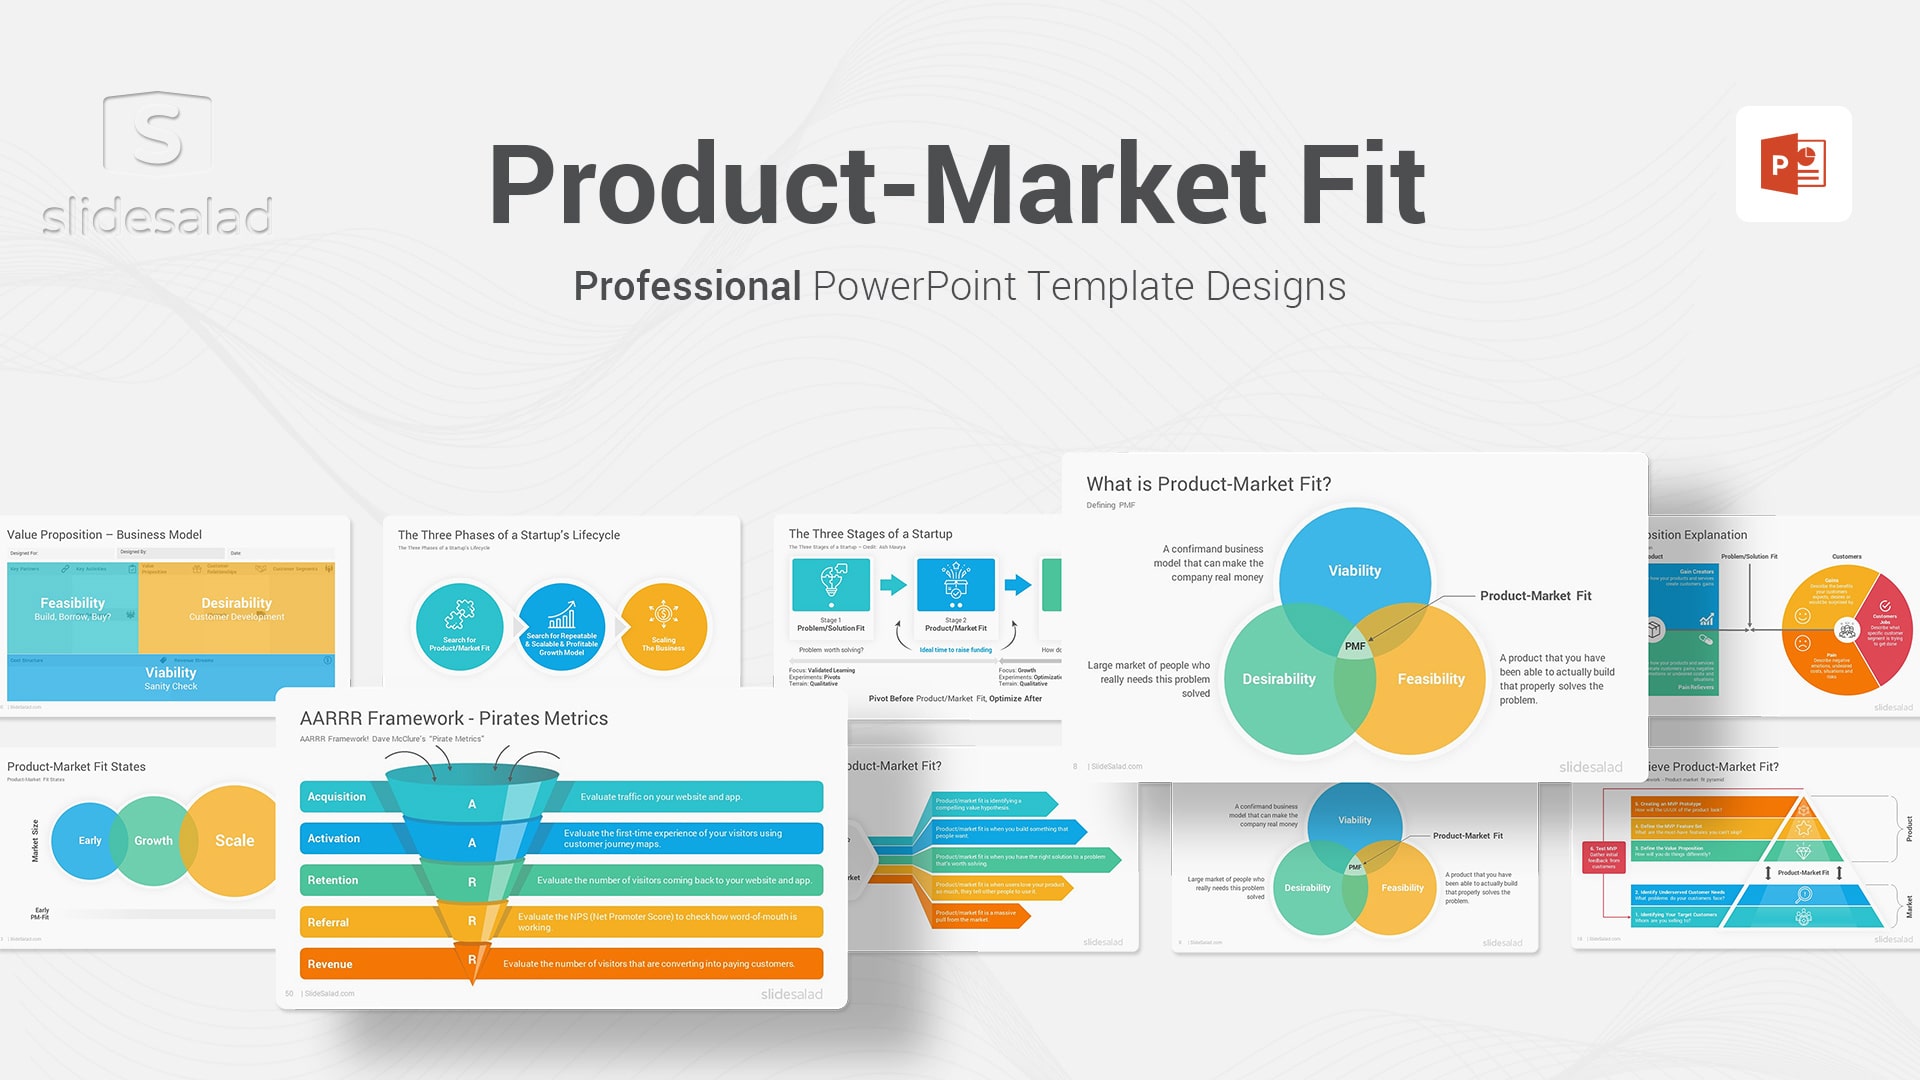 Product-Market Fit PowerPoint Template Designs - Best Strategic Templates for Achieving Product-Market Fit